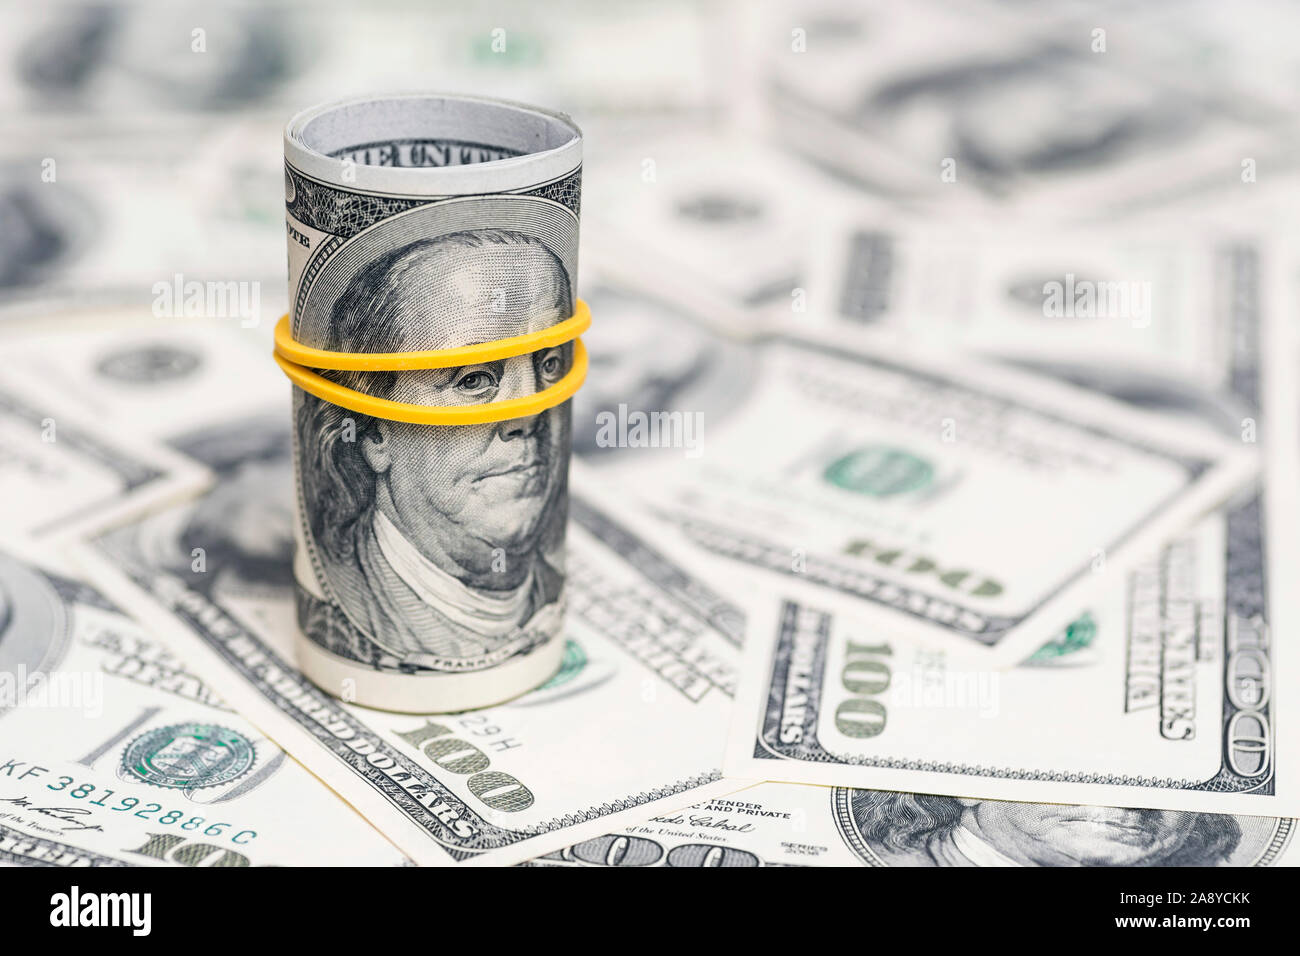 A roll of 100 dollar bills close-up on a pile of American dollars. Background from banknotes of 100 american dollars. Financial concept. Stock Photo